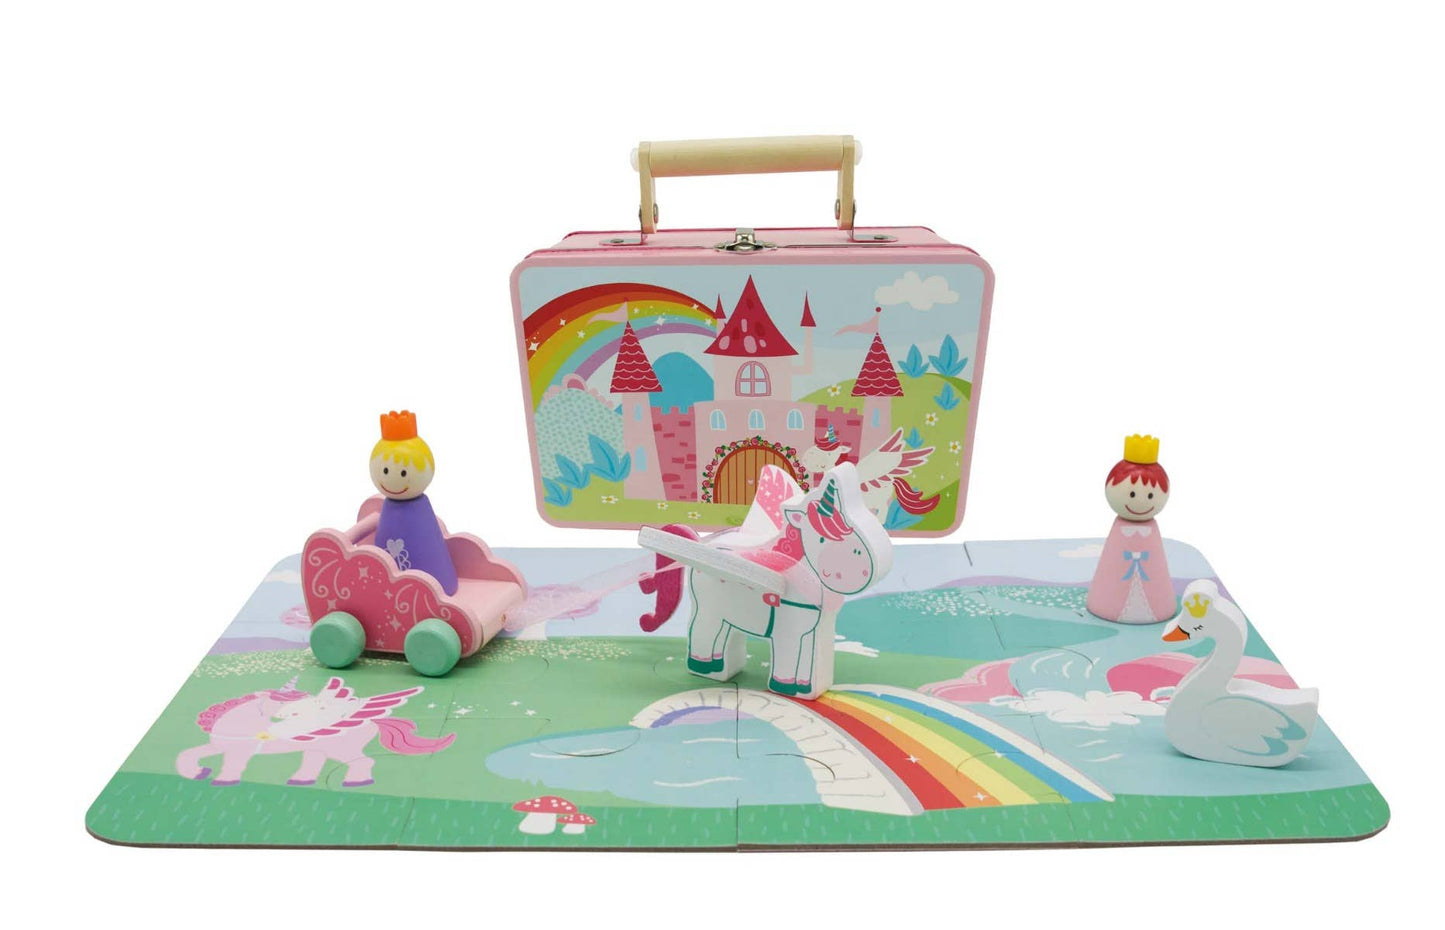 Unicorn Playset With Puzzle In Tin